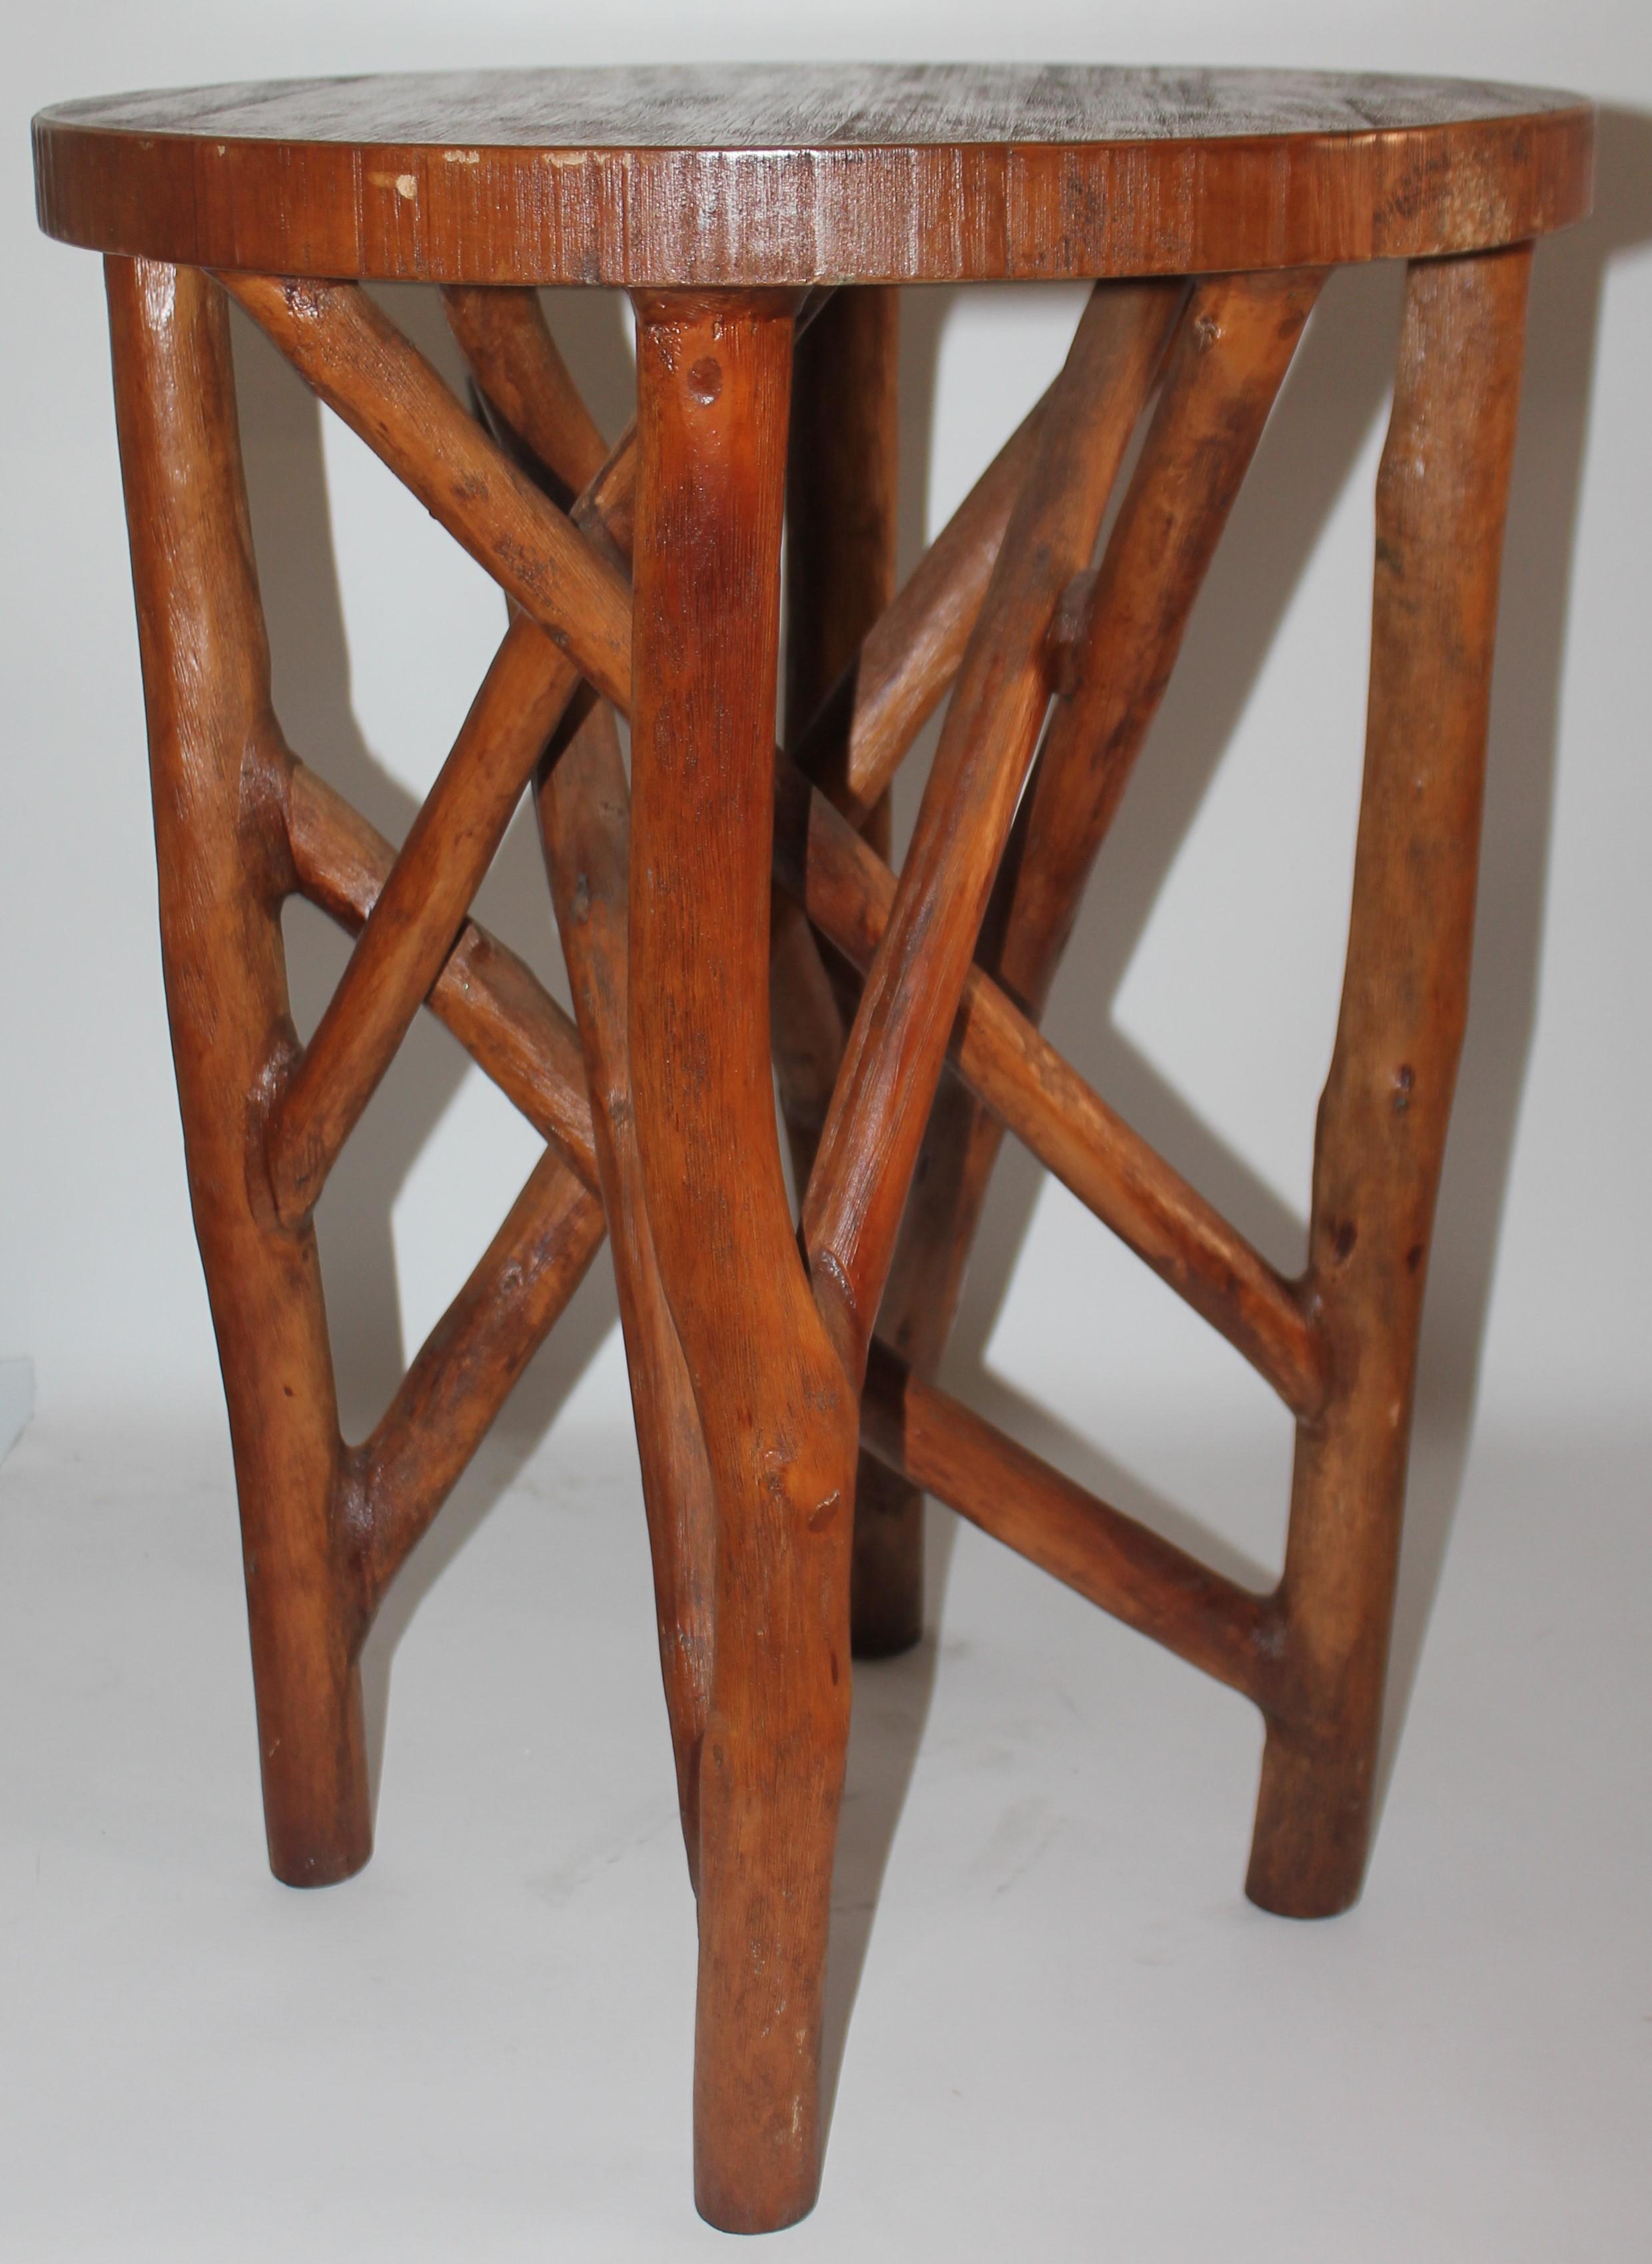 Early hand made cypress side table that is in fine condition and sturdy. Great rustic look. Perfect for a cabin or Indian weaving's collection.